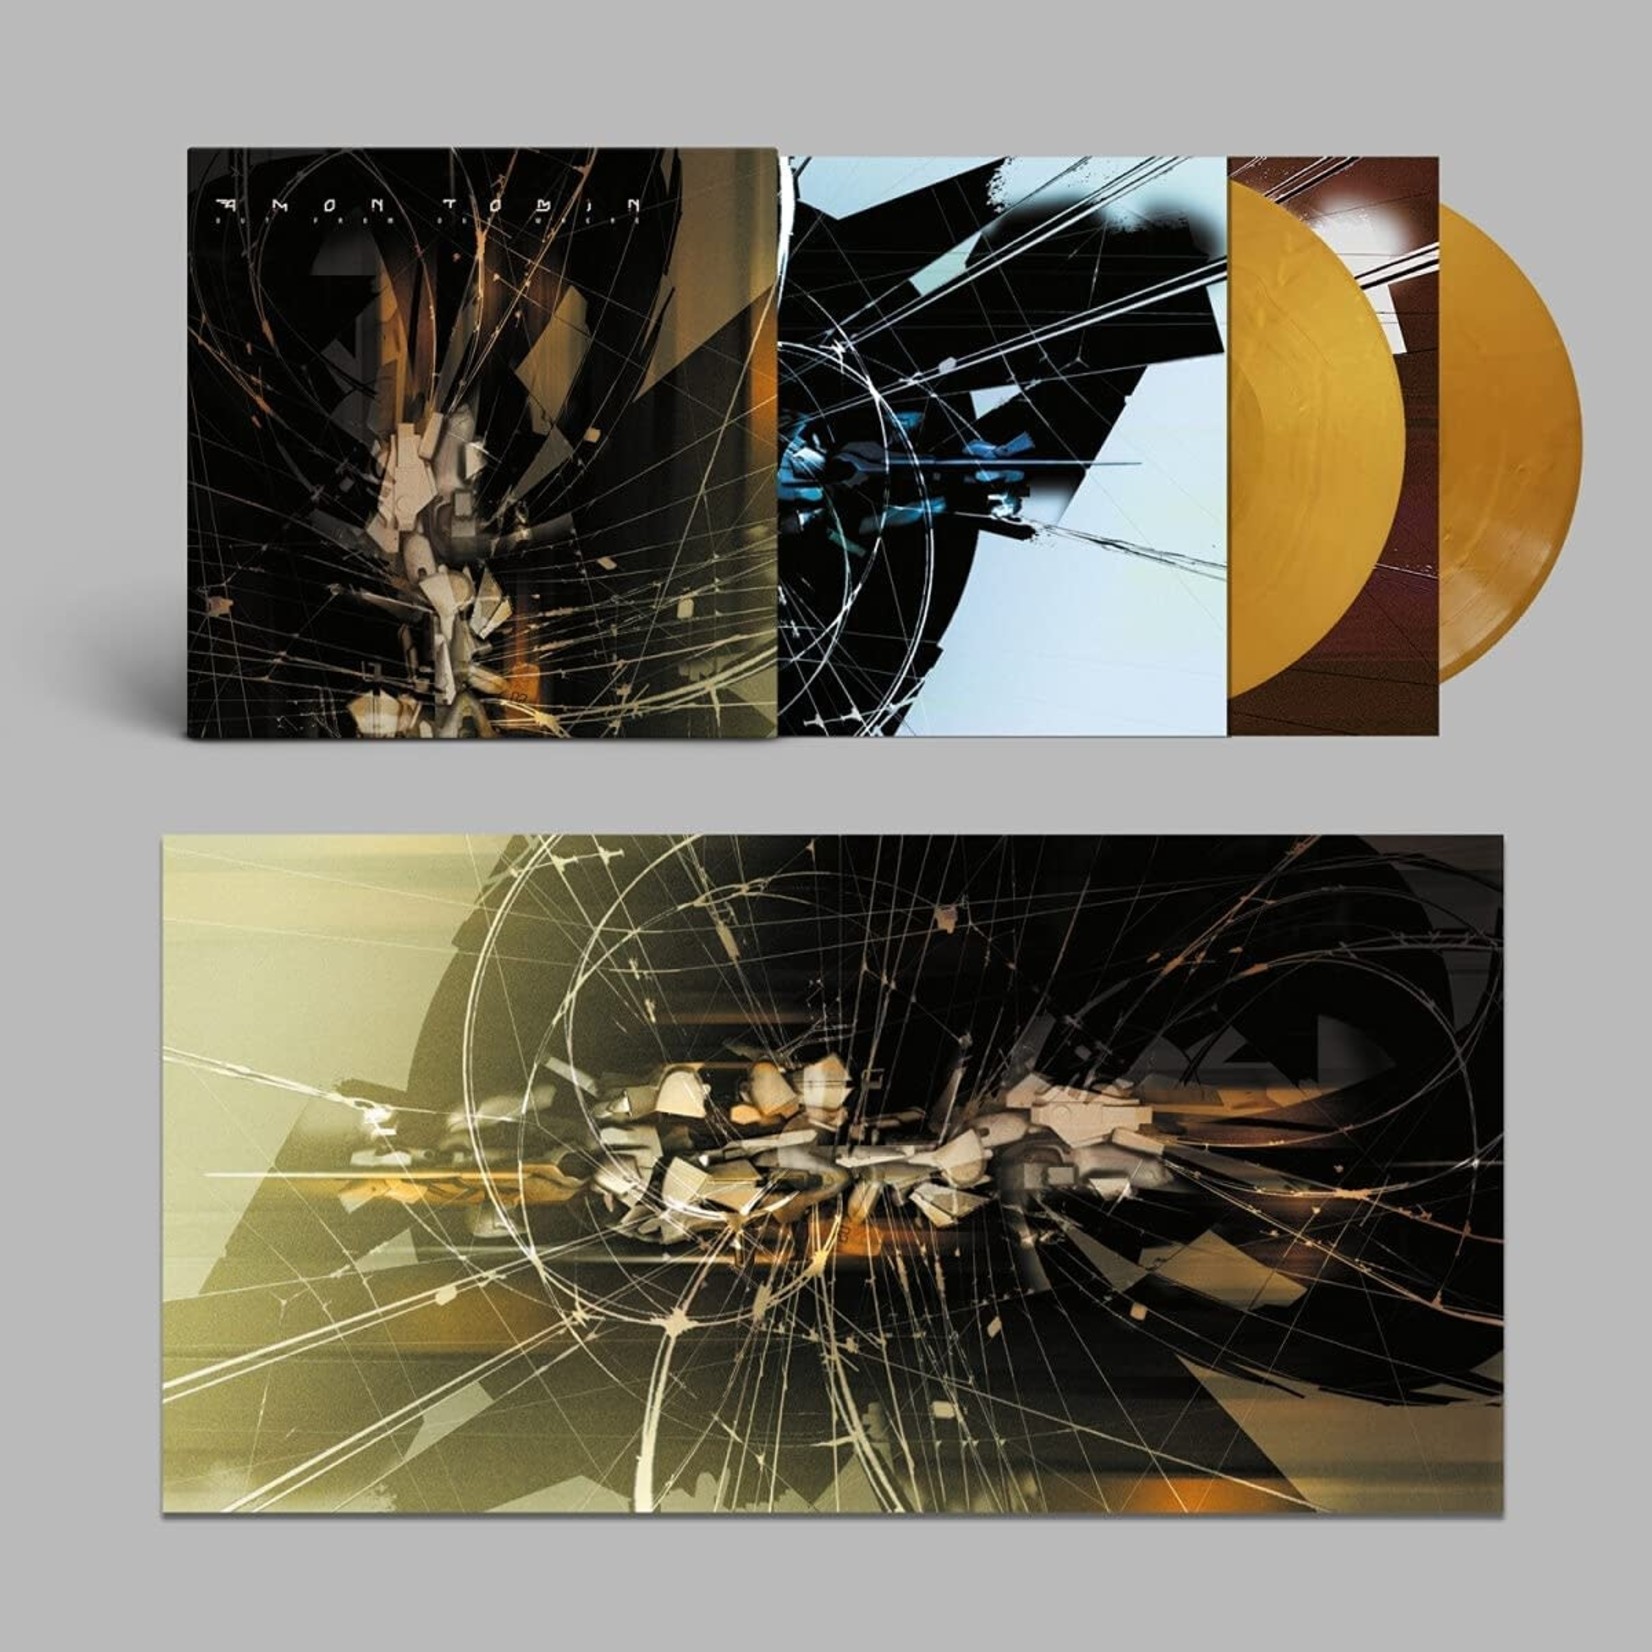 Amon Tobin - Out From Out Where (Indie Gold Vinyl) [2LP]